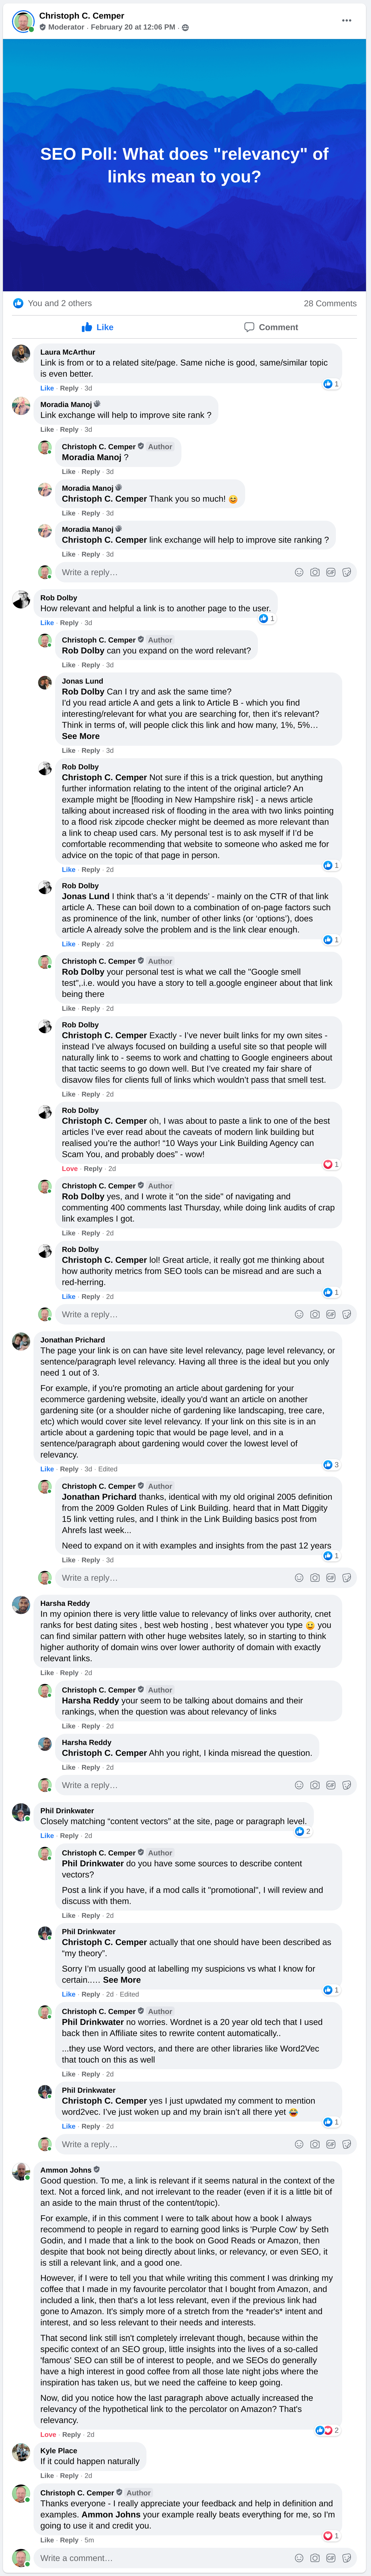 Facebook users of the White Hat SEO group responding to the relevance of links question